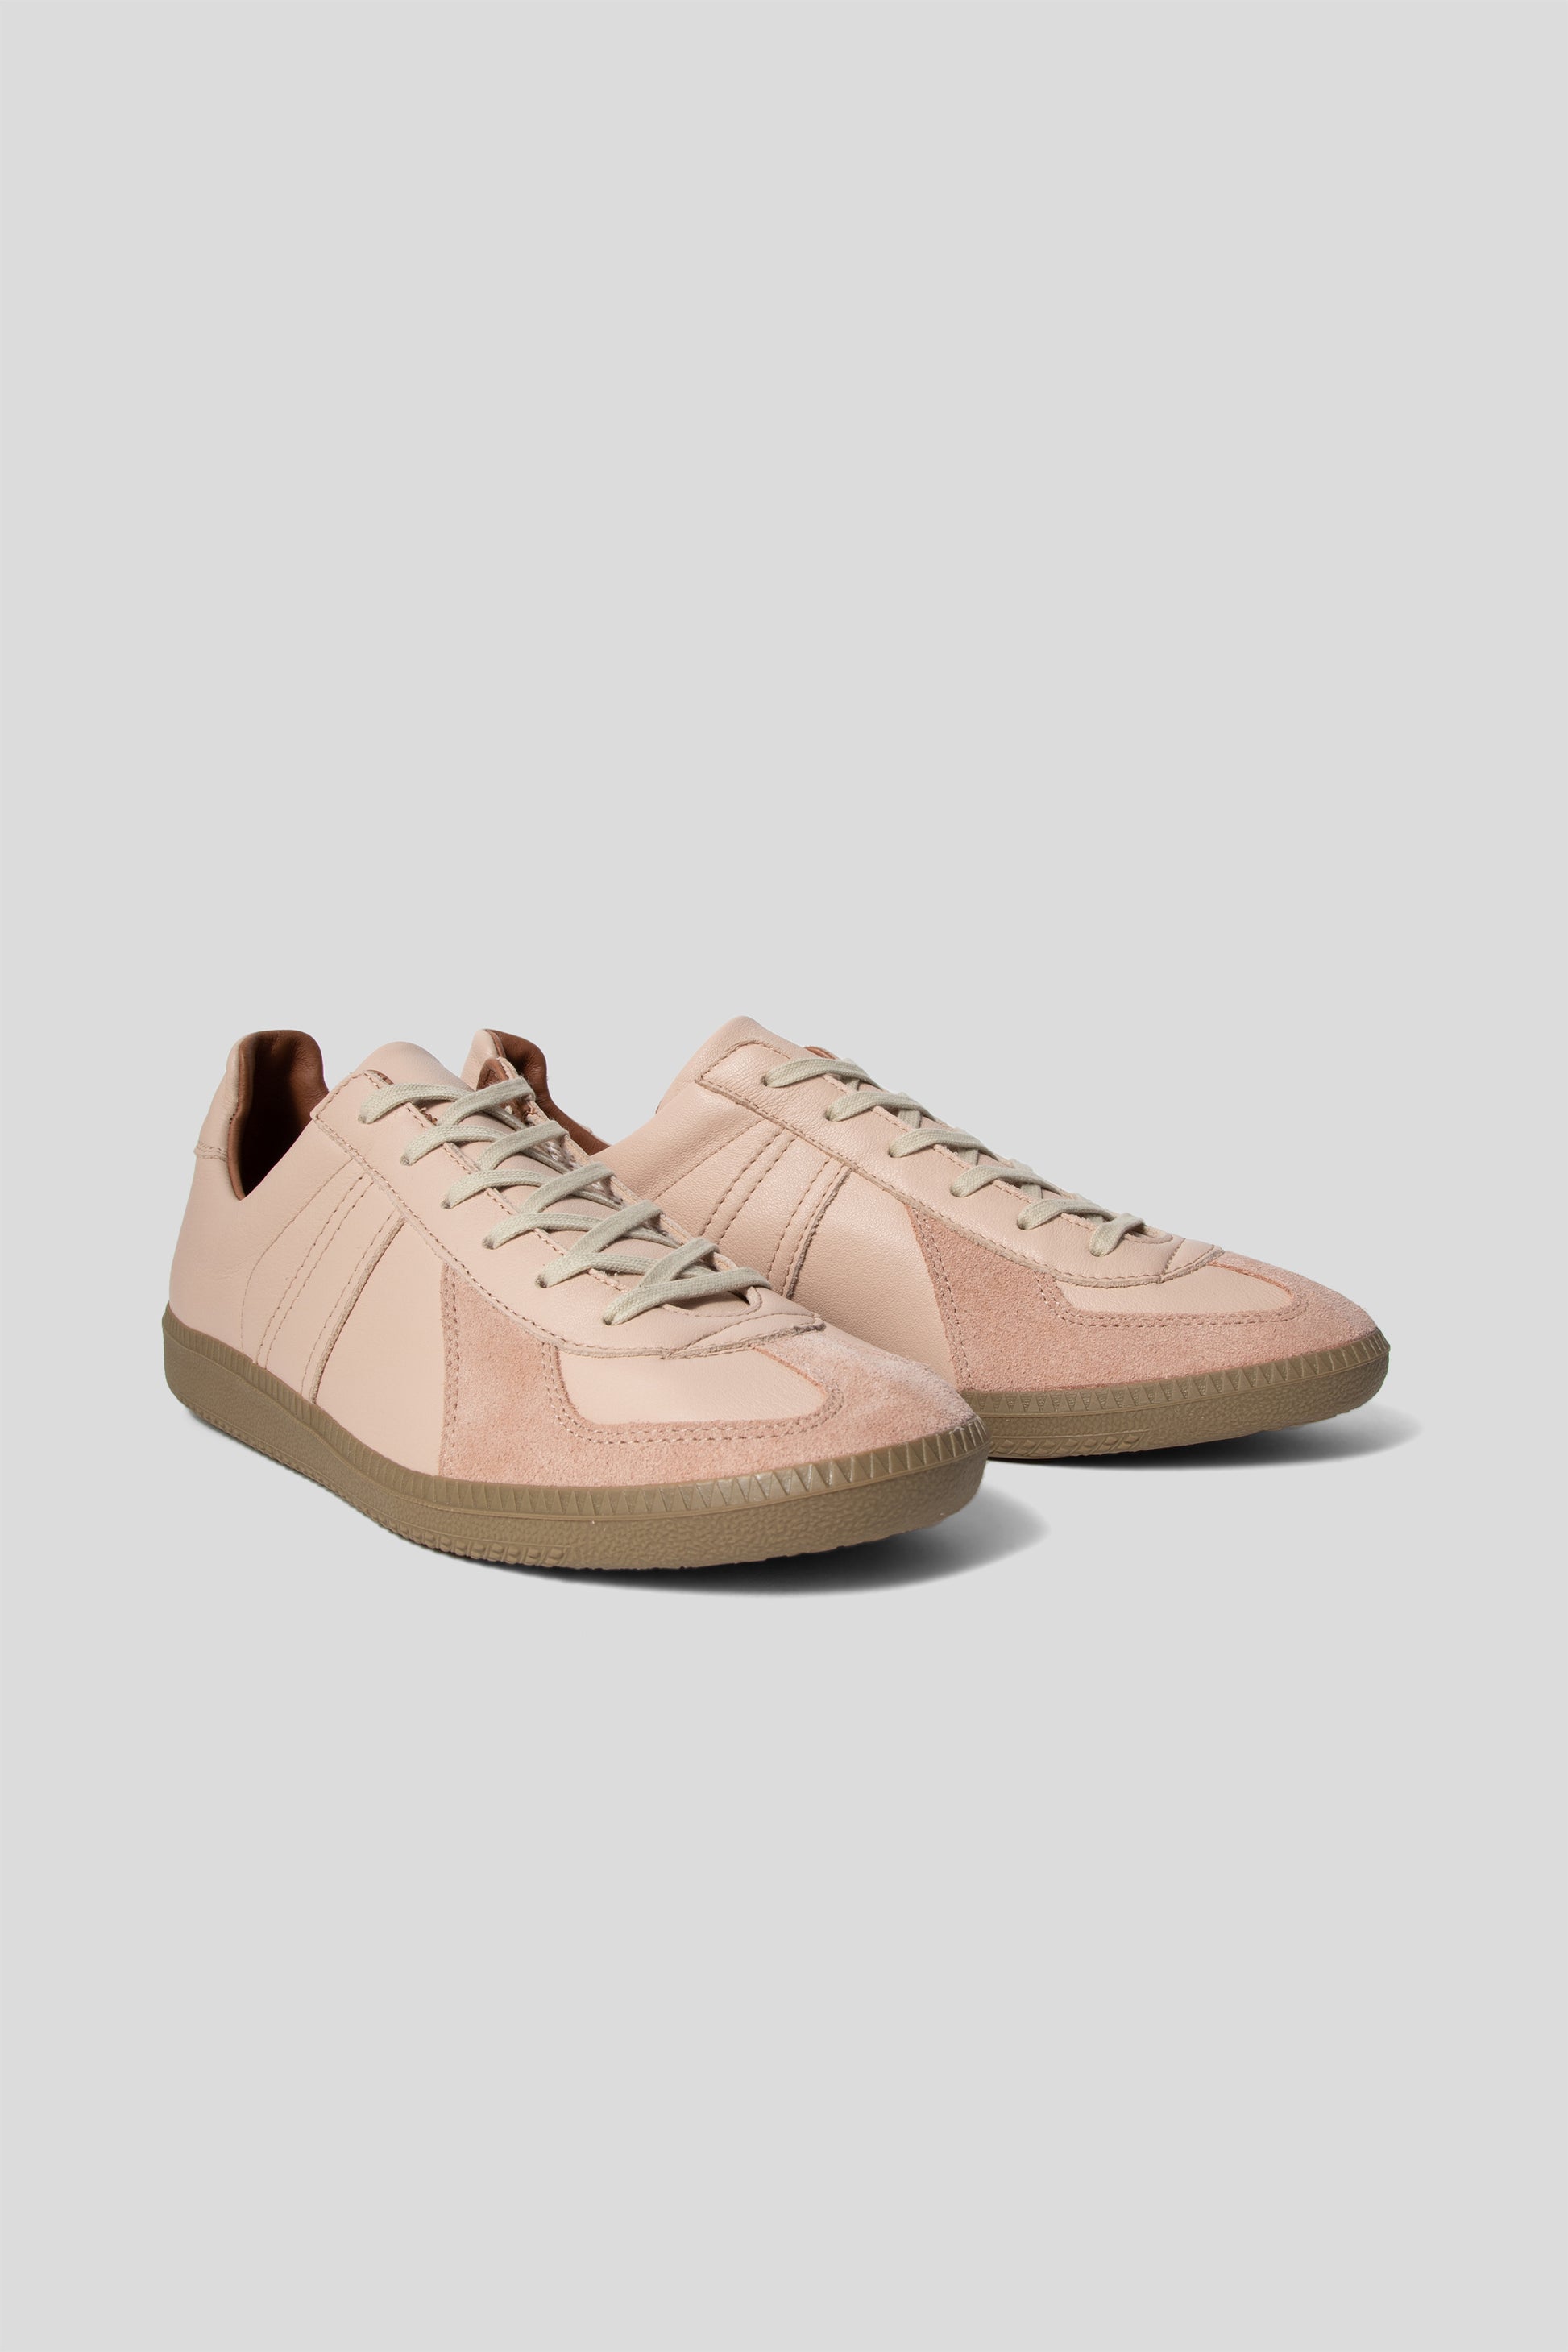 Reproduction of Found German Military Trainer Shoe in Nude